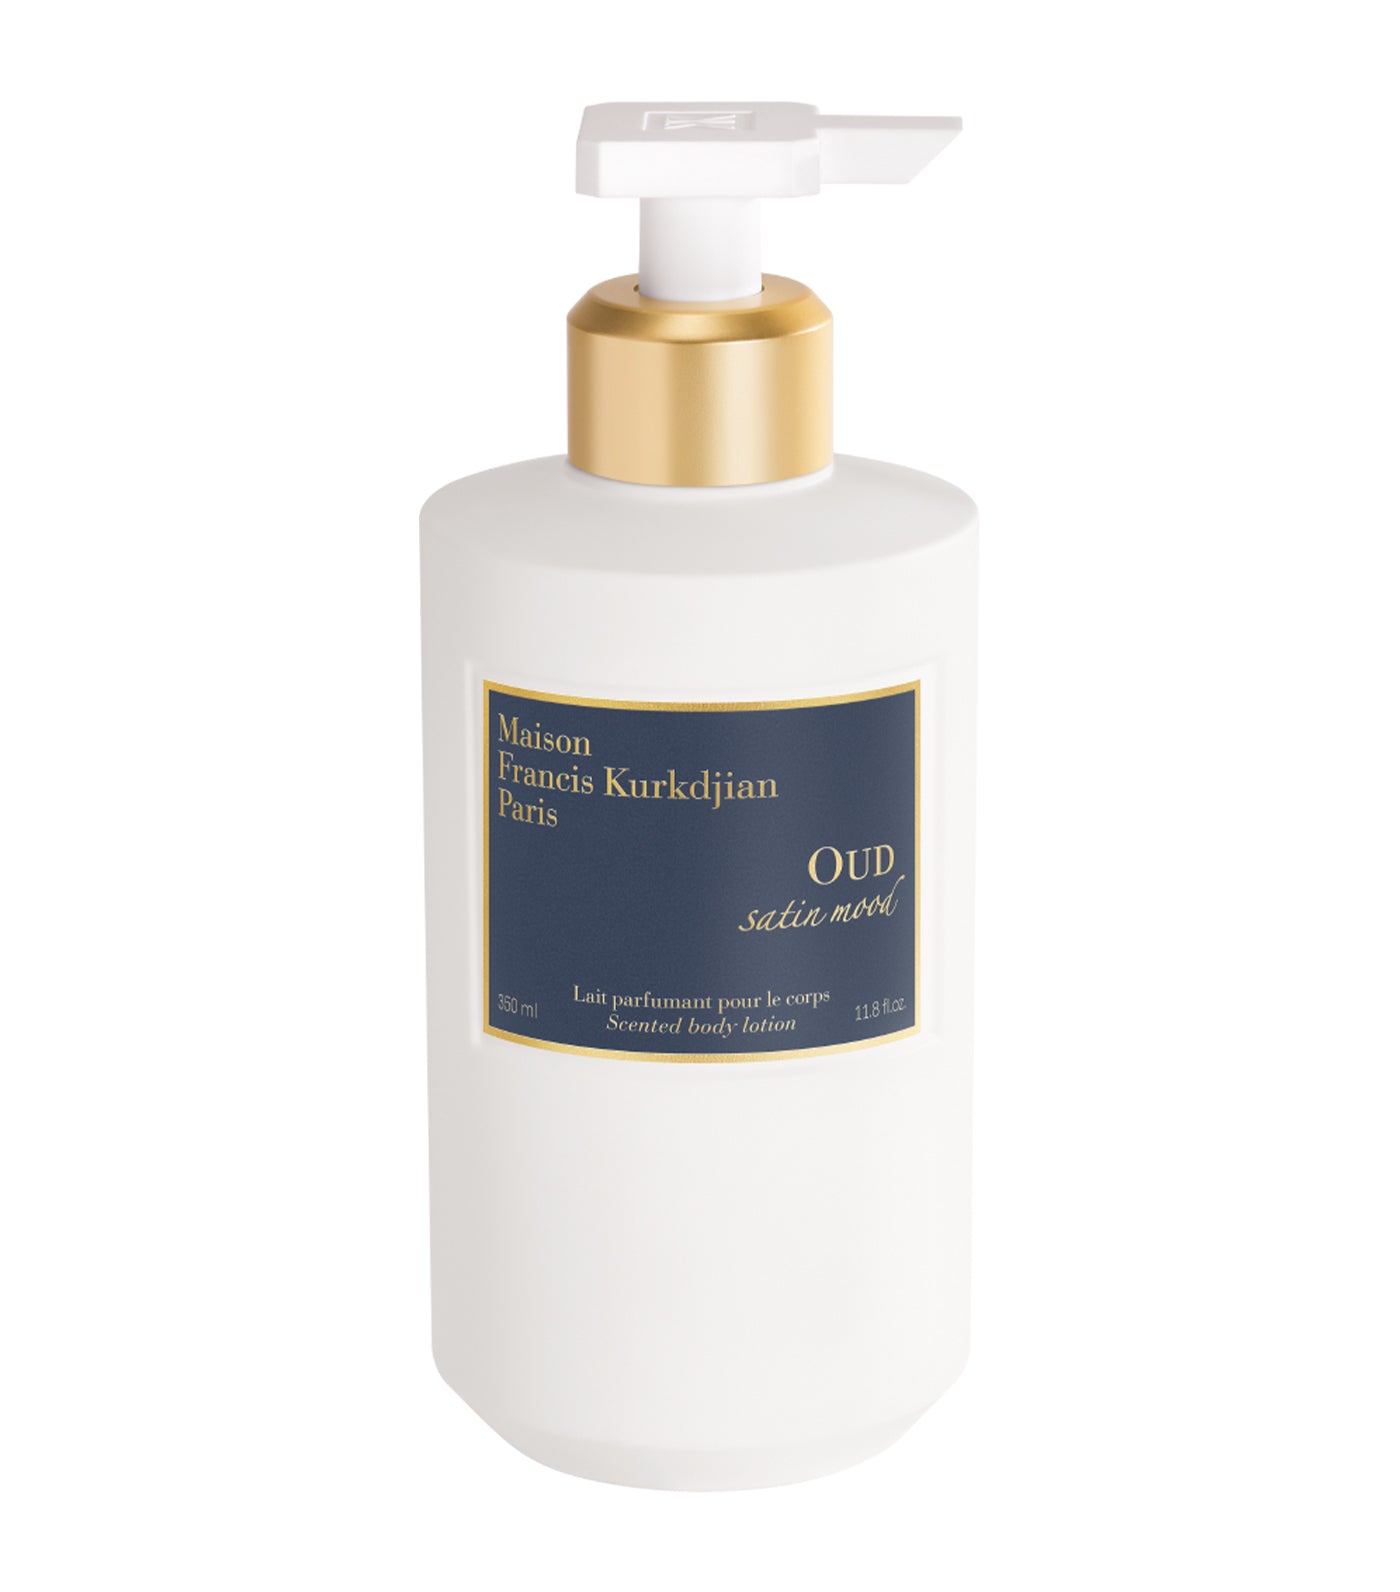 OUD satin mood Scented body lotion